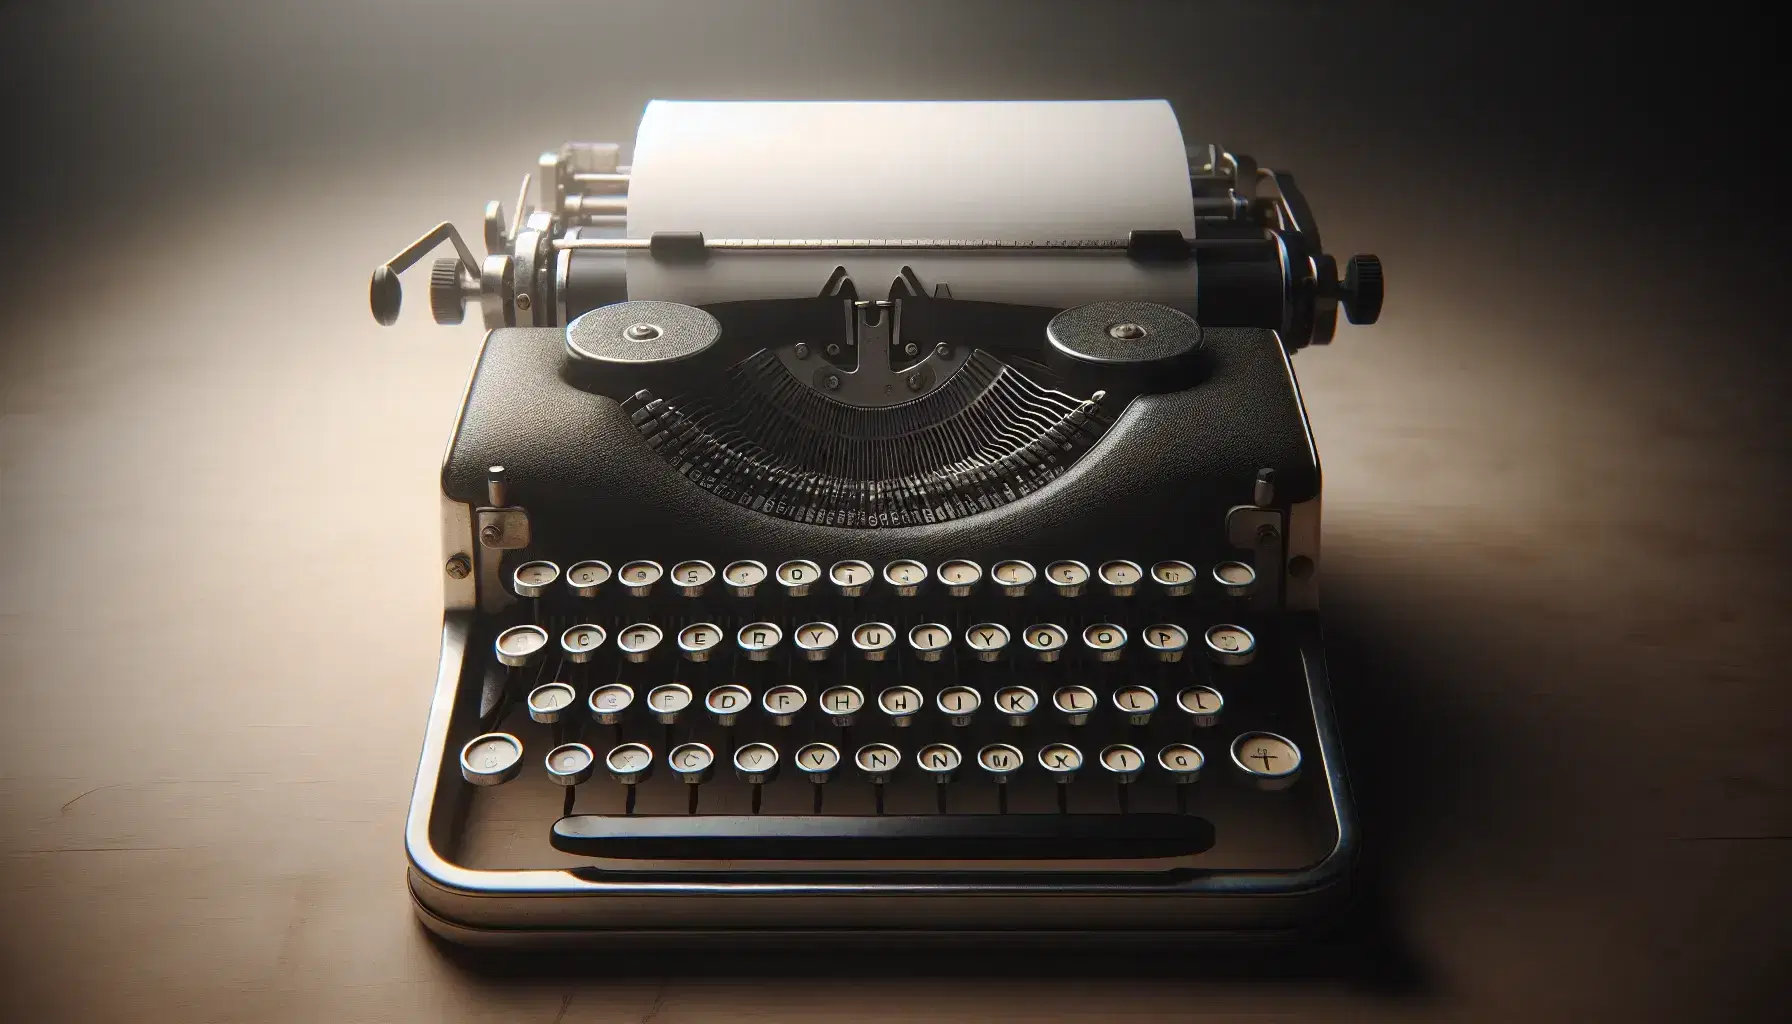 Close-up view of a vintage typewriter with blank paper, showcasing round keys and a dark gray metallic finish in a softly blurred background.